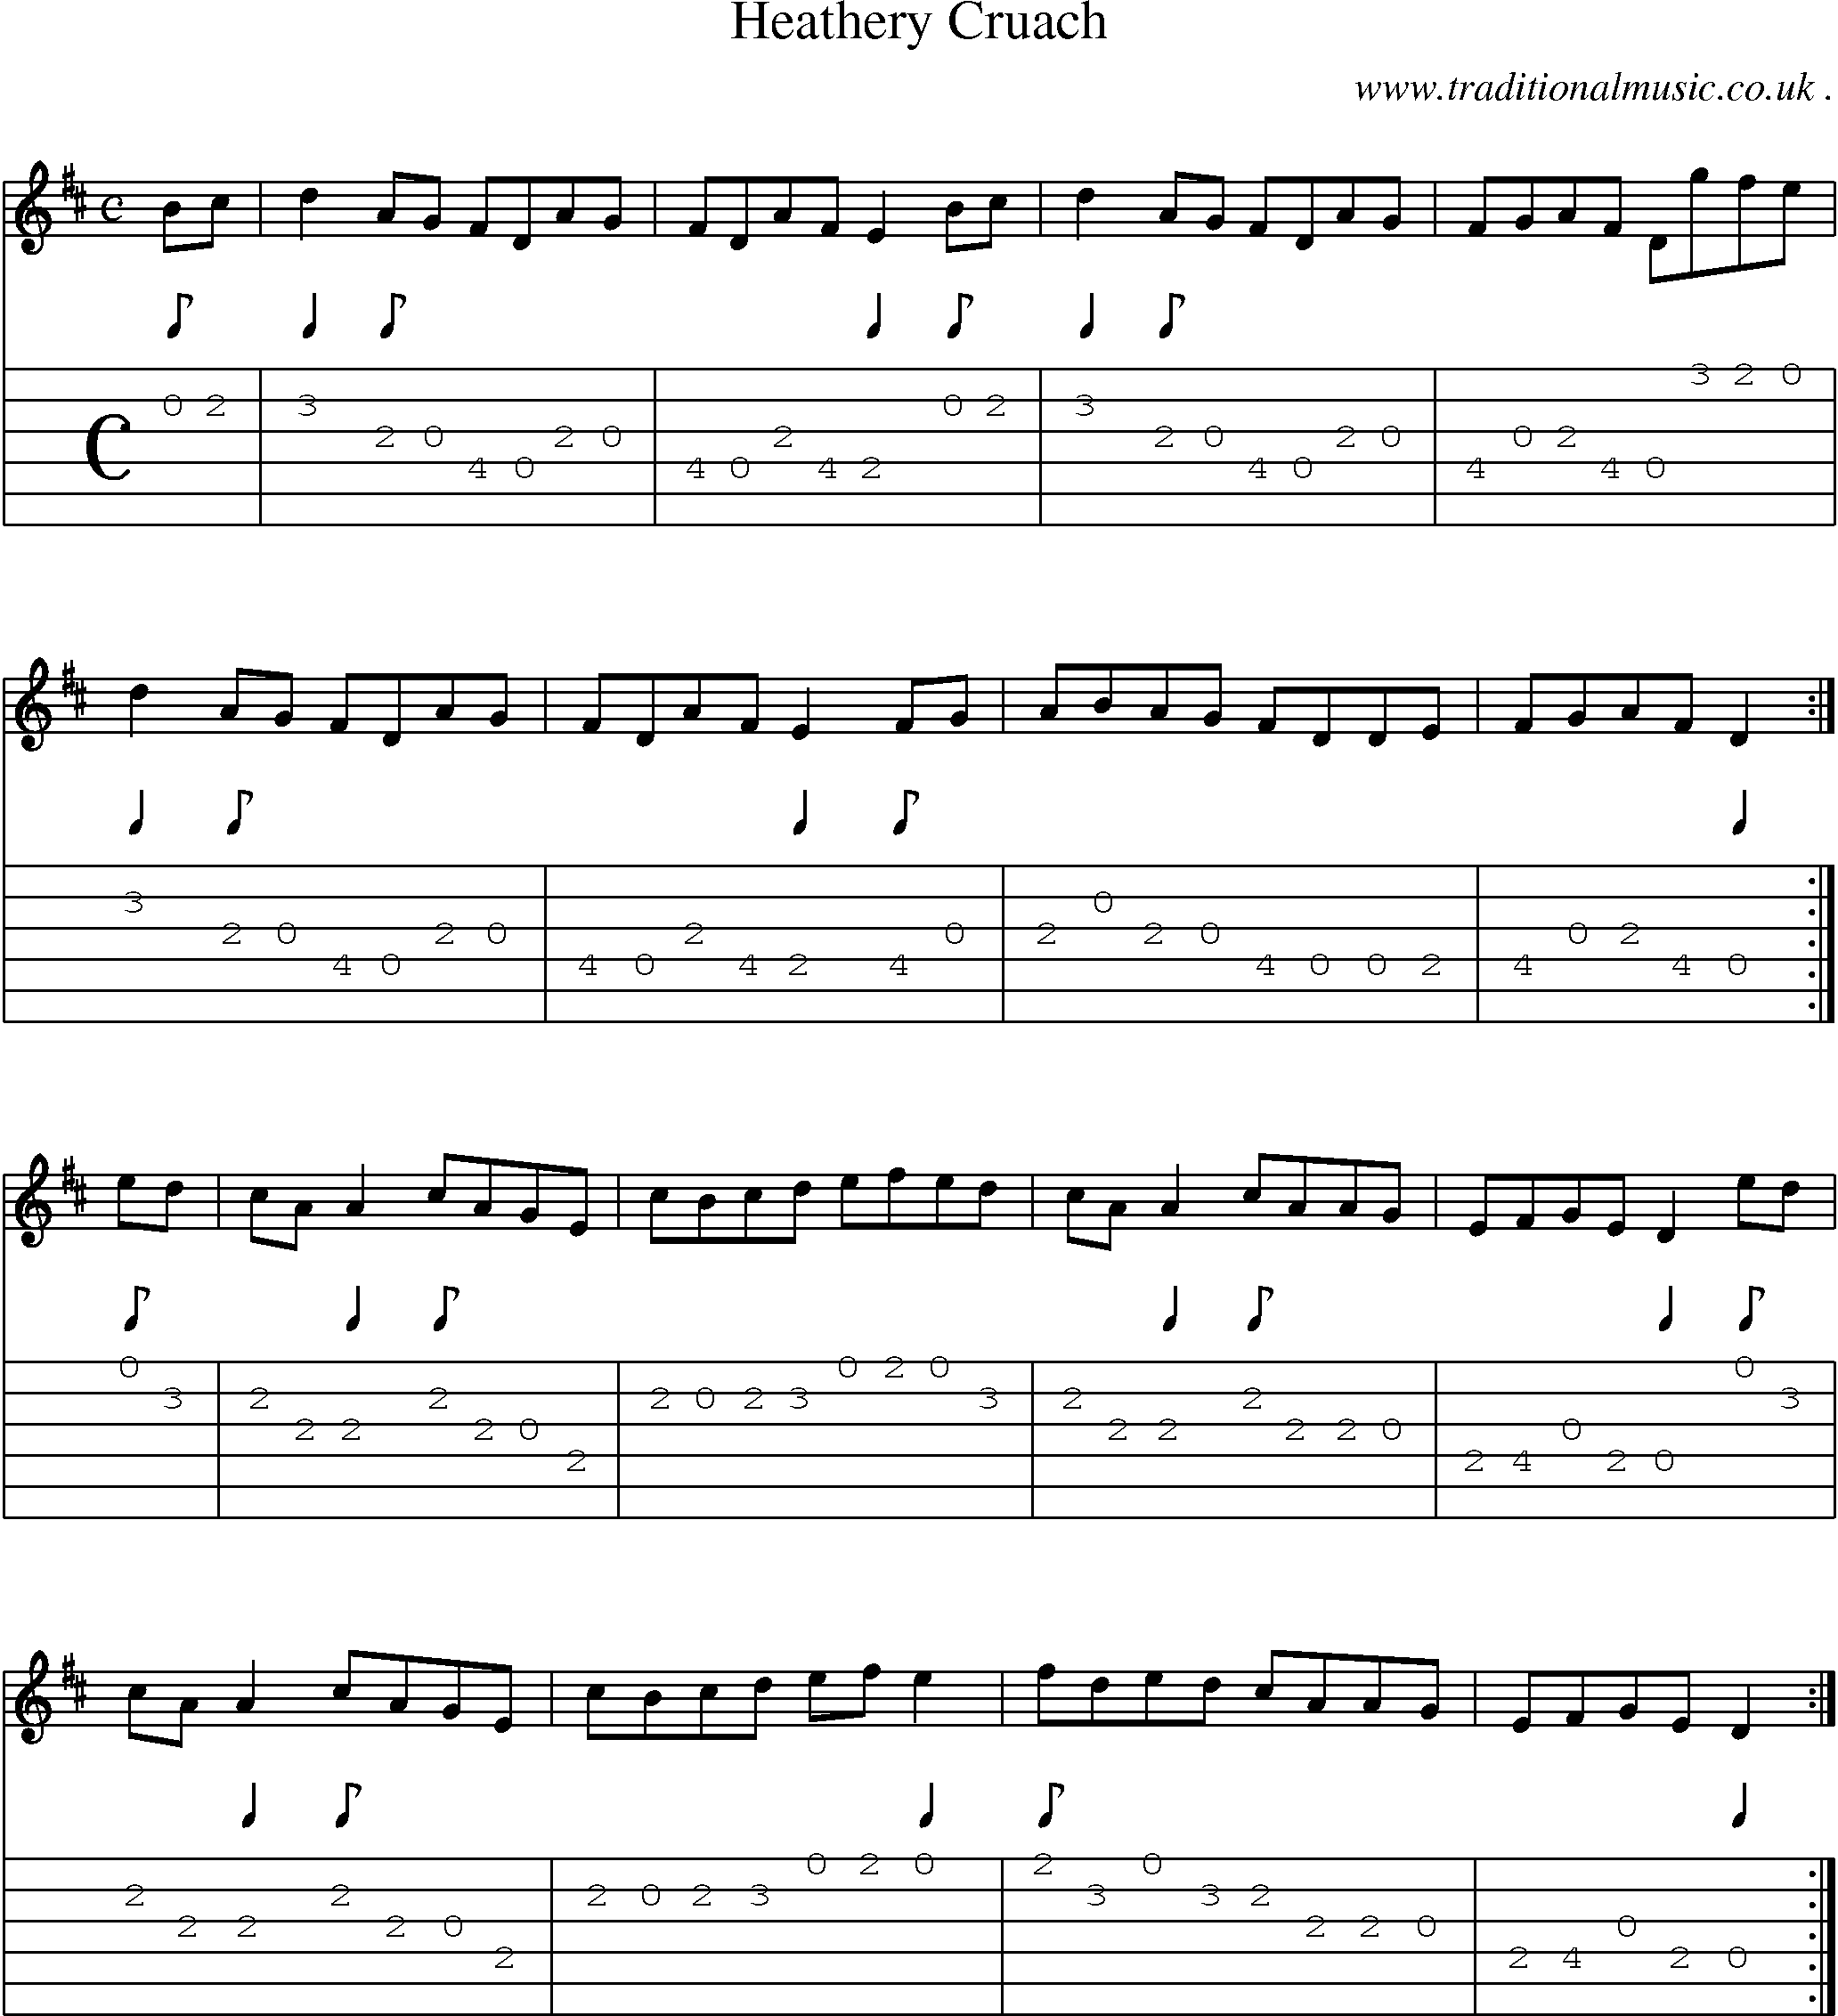 Sheet-Music and Guitar Tabs for Heathery Cruach